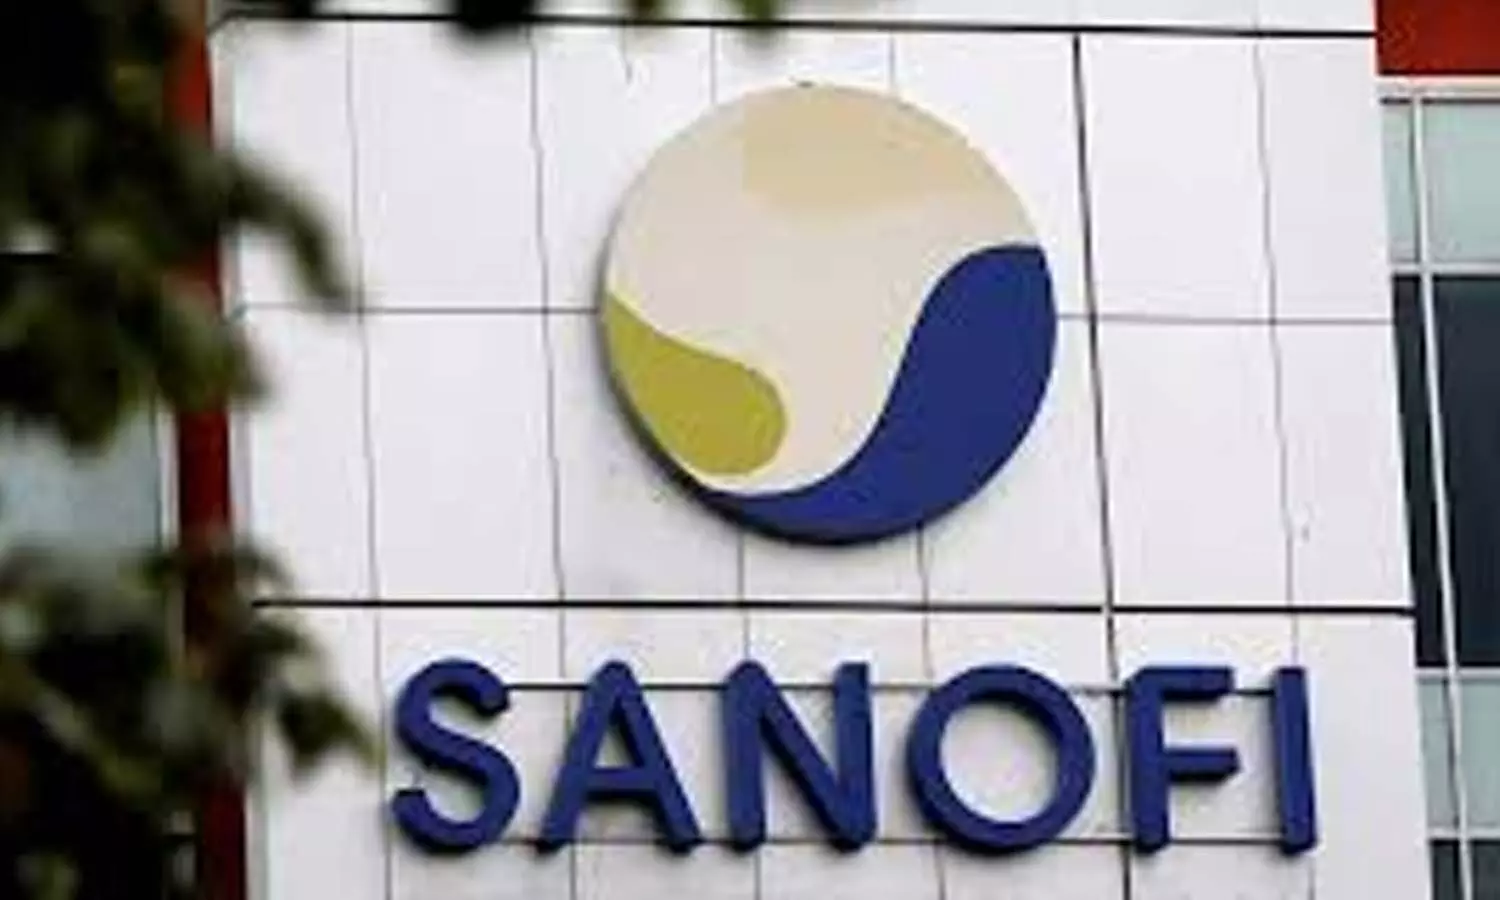 Sanofi, Regeneron get CHMP recommendation for Dupixent approval to treat severe asthma with type 2 inflammation in kids